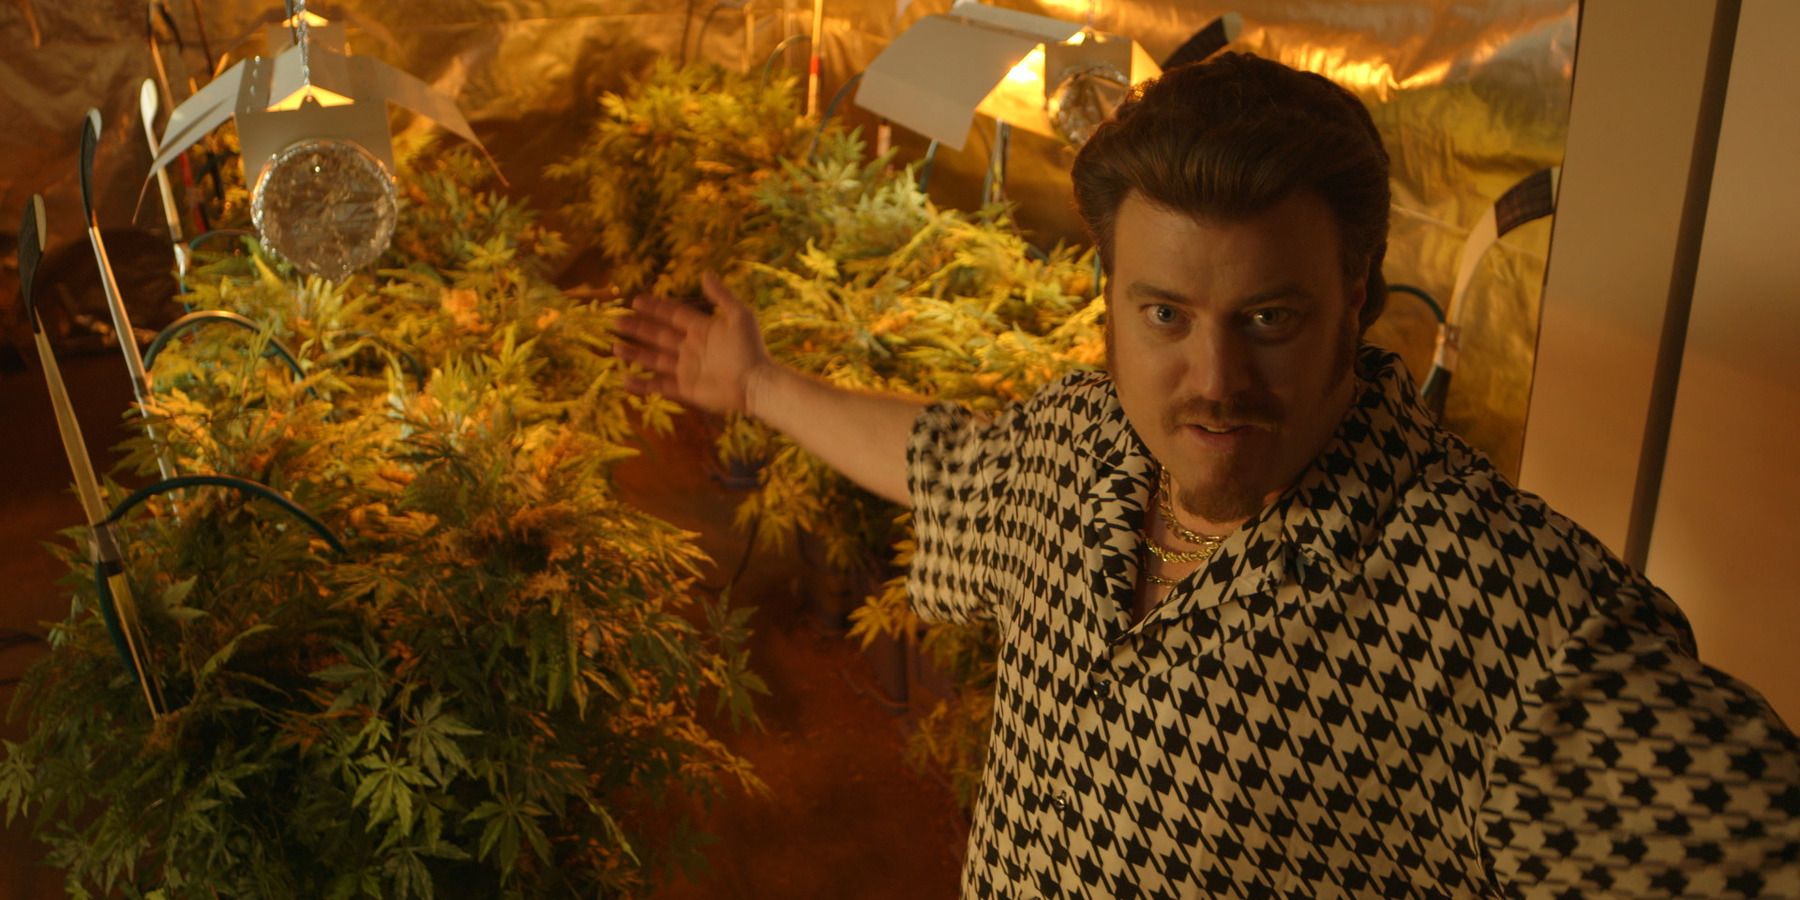 Trailer Park Boys Ten Things You Never Knew About Ricky